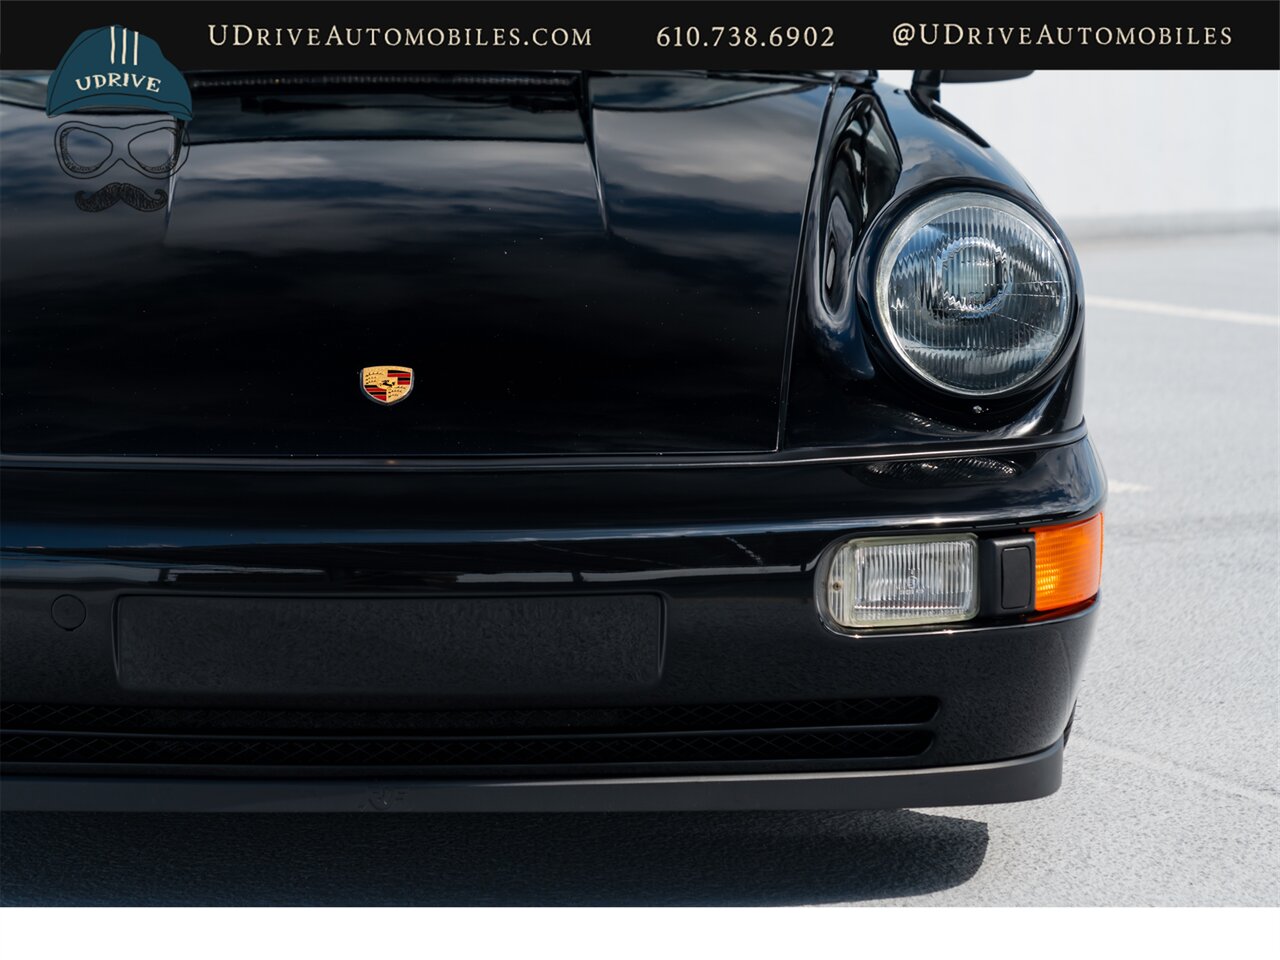 1989 Porsche 911 Carrera 4  964 C4 5 Speed Manual $63k Recent Service and Upgrades - Photo 11 - West Chester, PA 19382